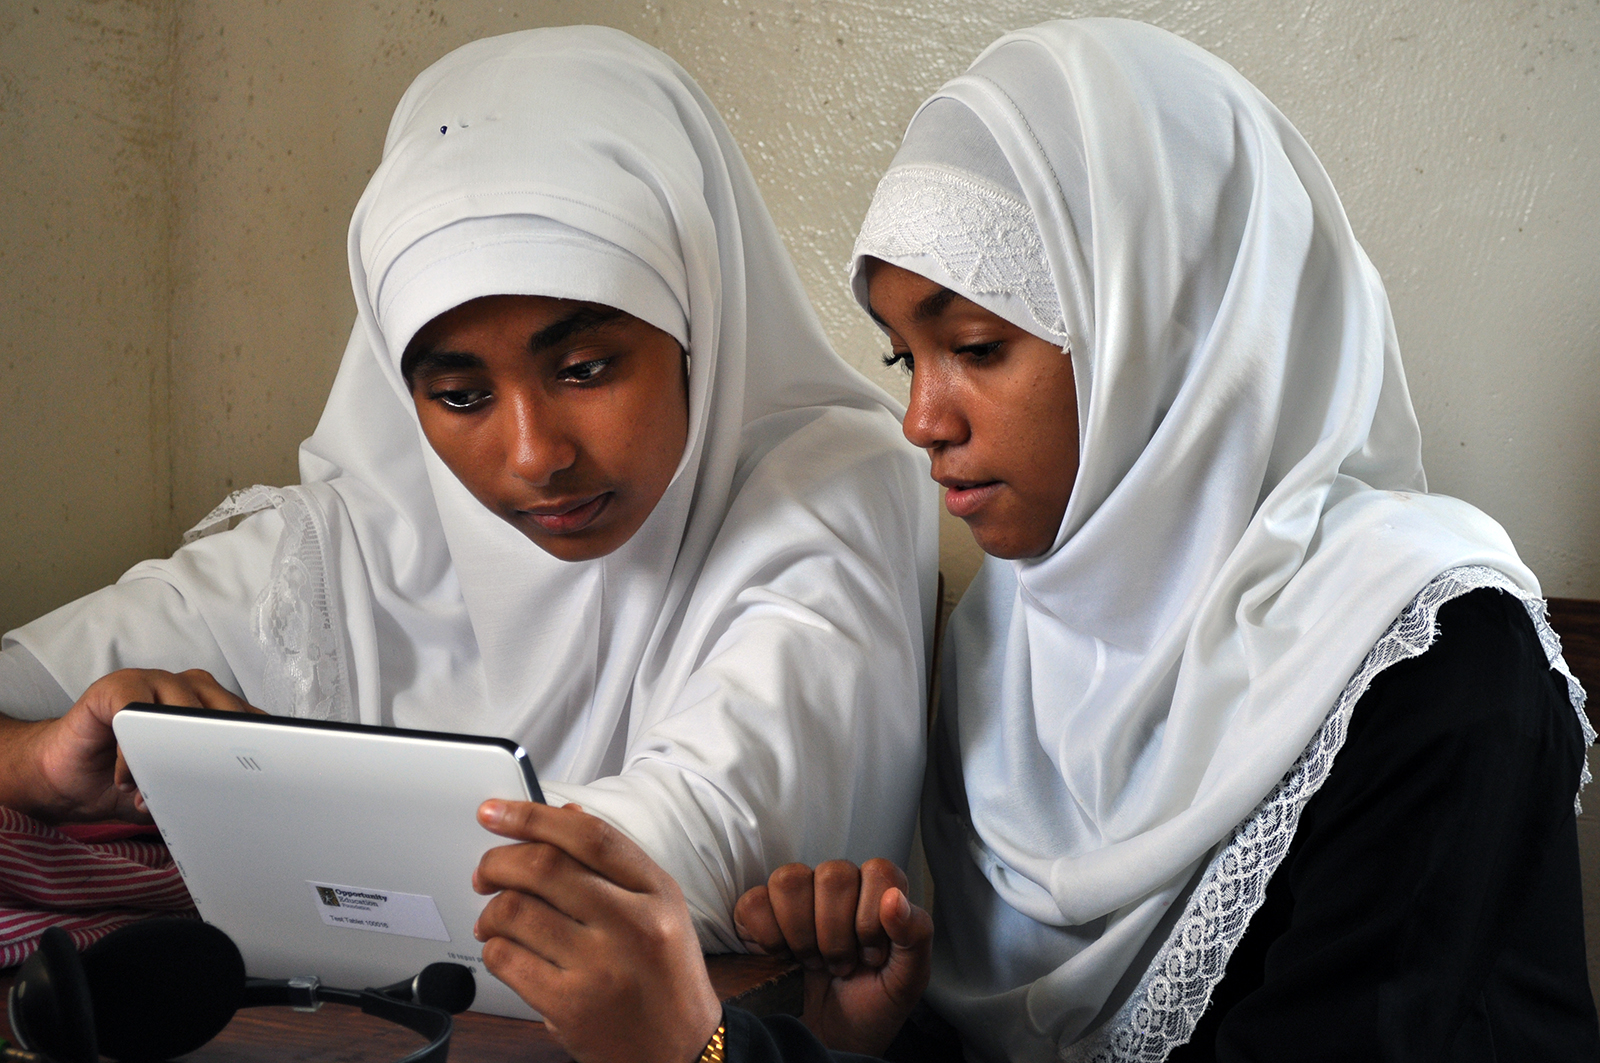 Two Zanzibar students work together in class holding an Opportunity Tablet, provided by Opportunity Education.